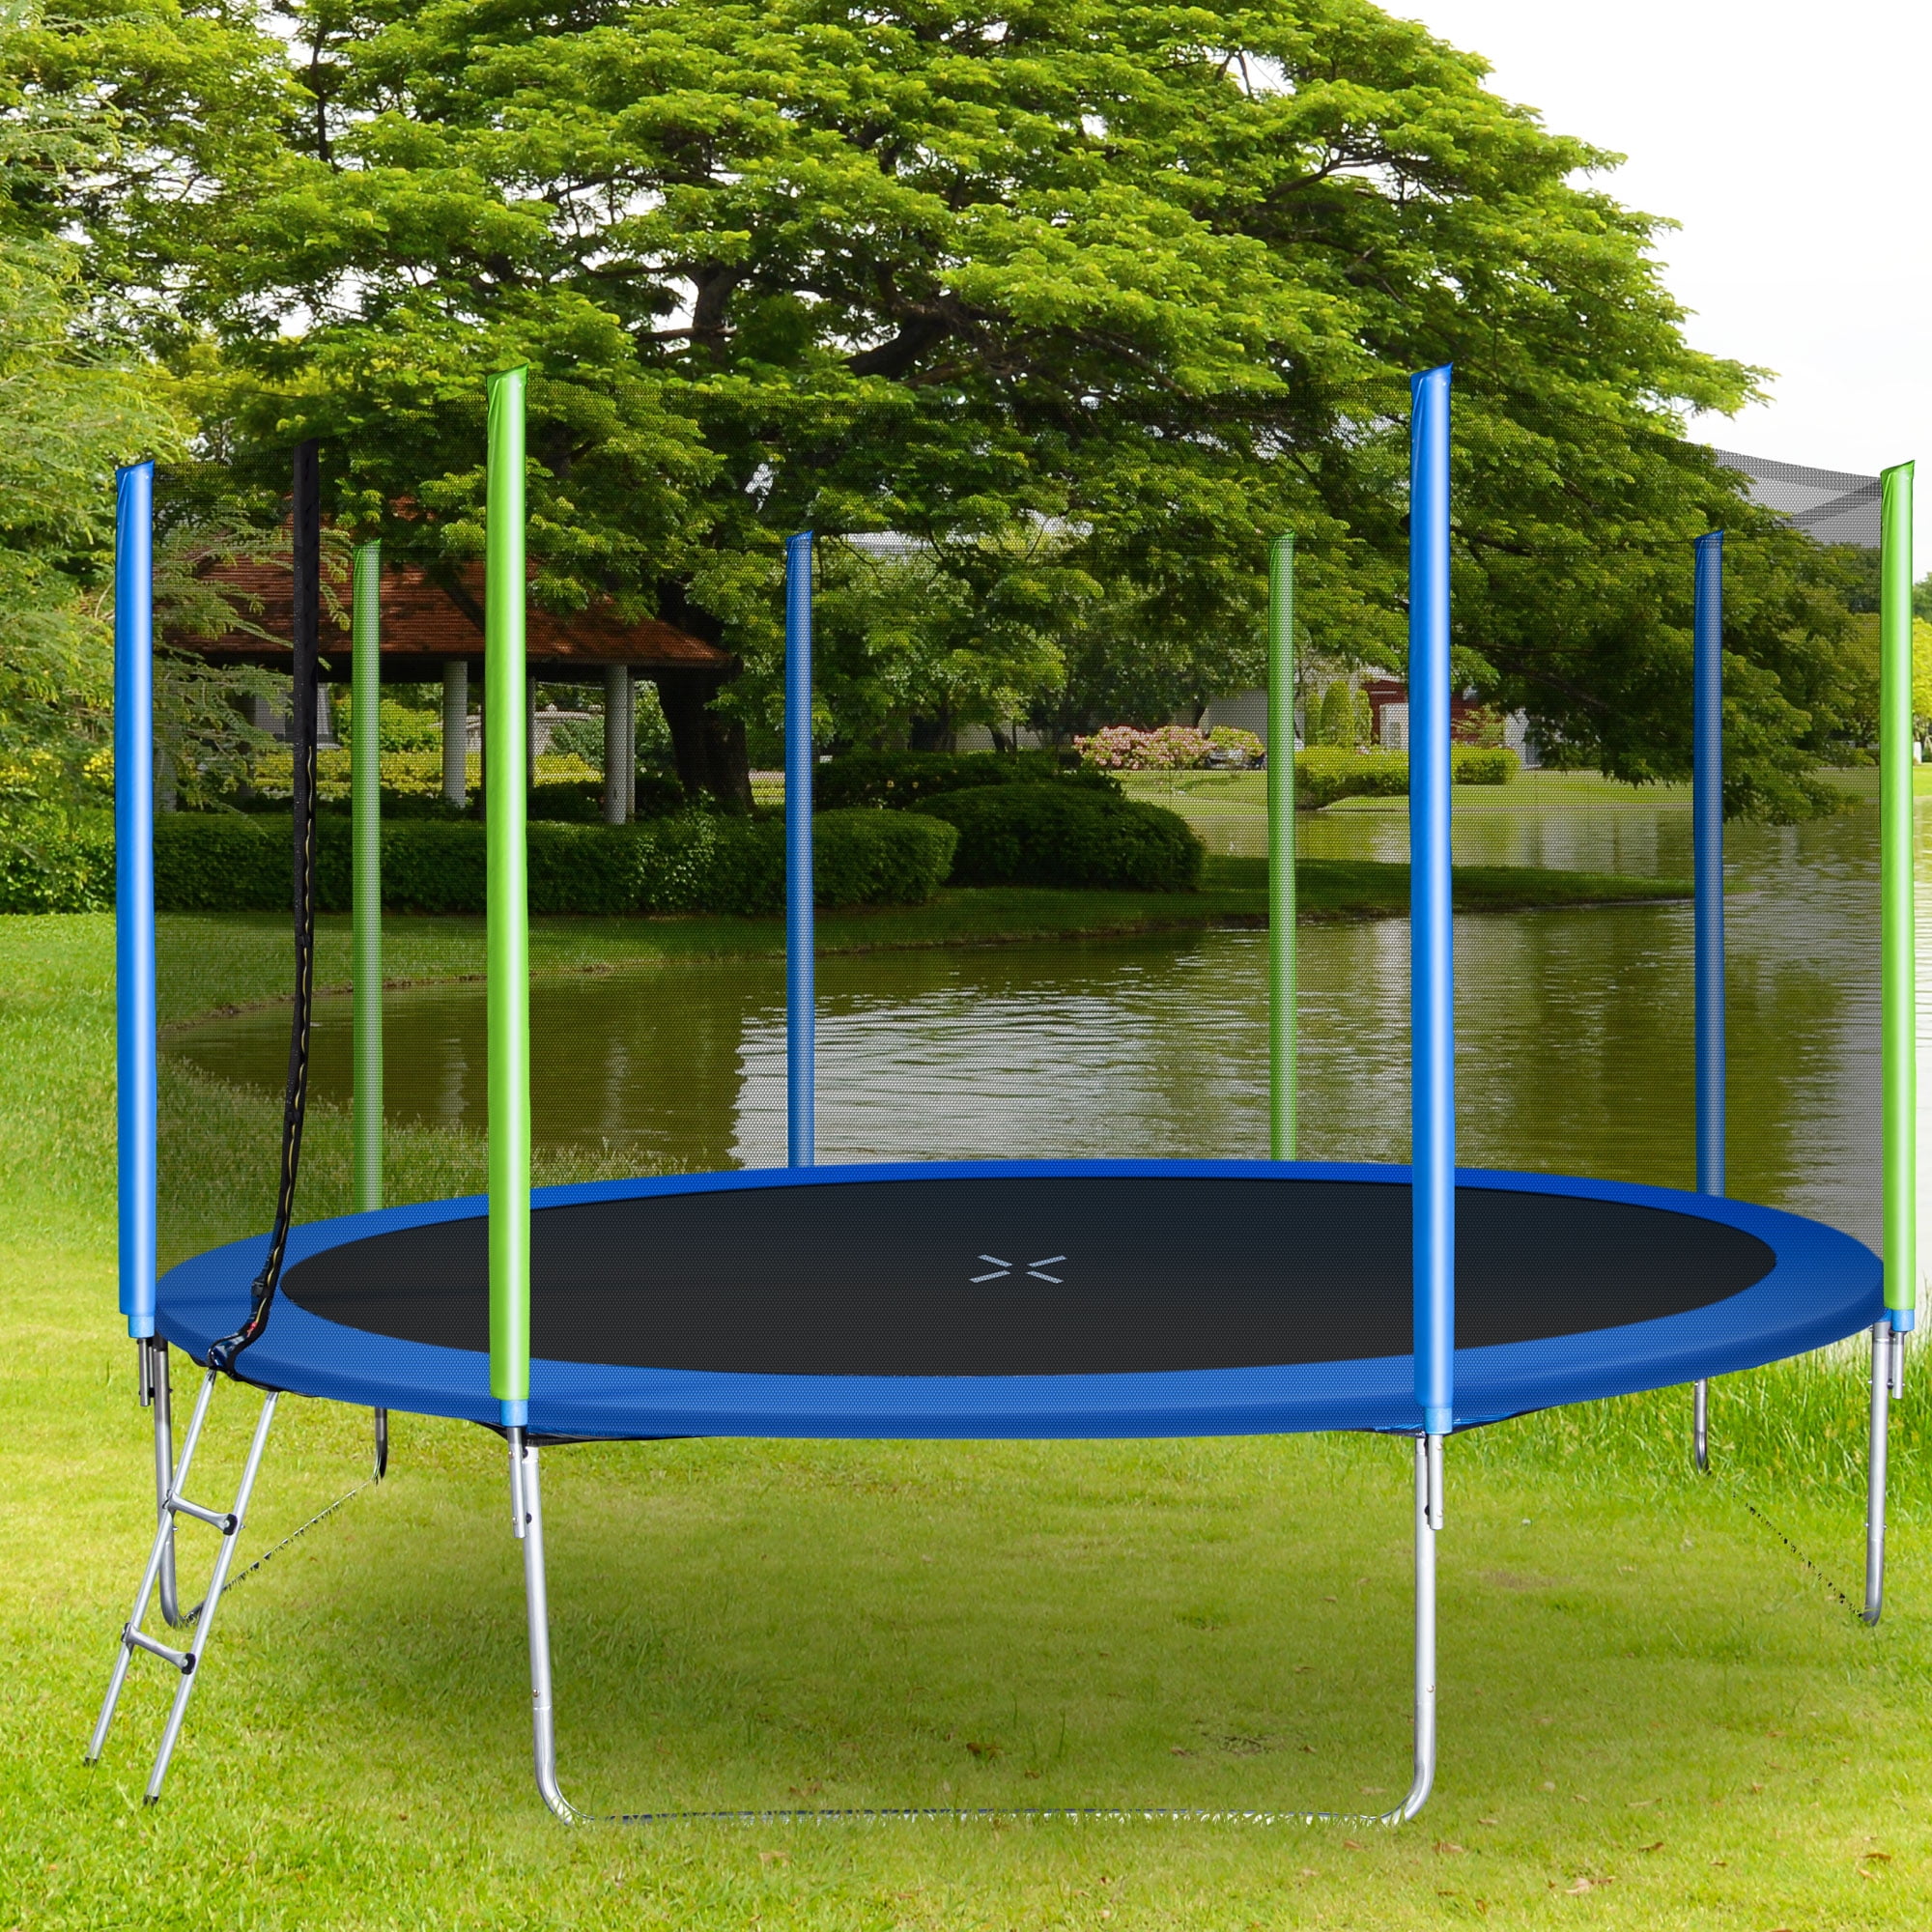 Outdoor Trampoline for Kids, Recreational Trampoline with Safety Enclosure Net, Ladder and Wind Stakes